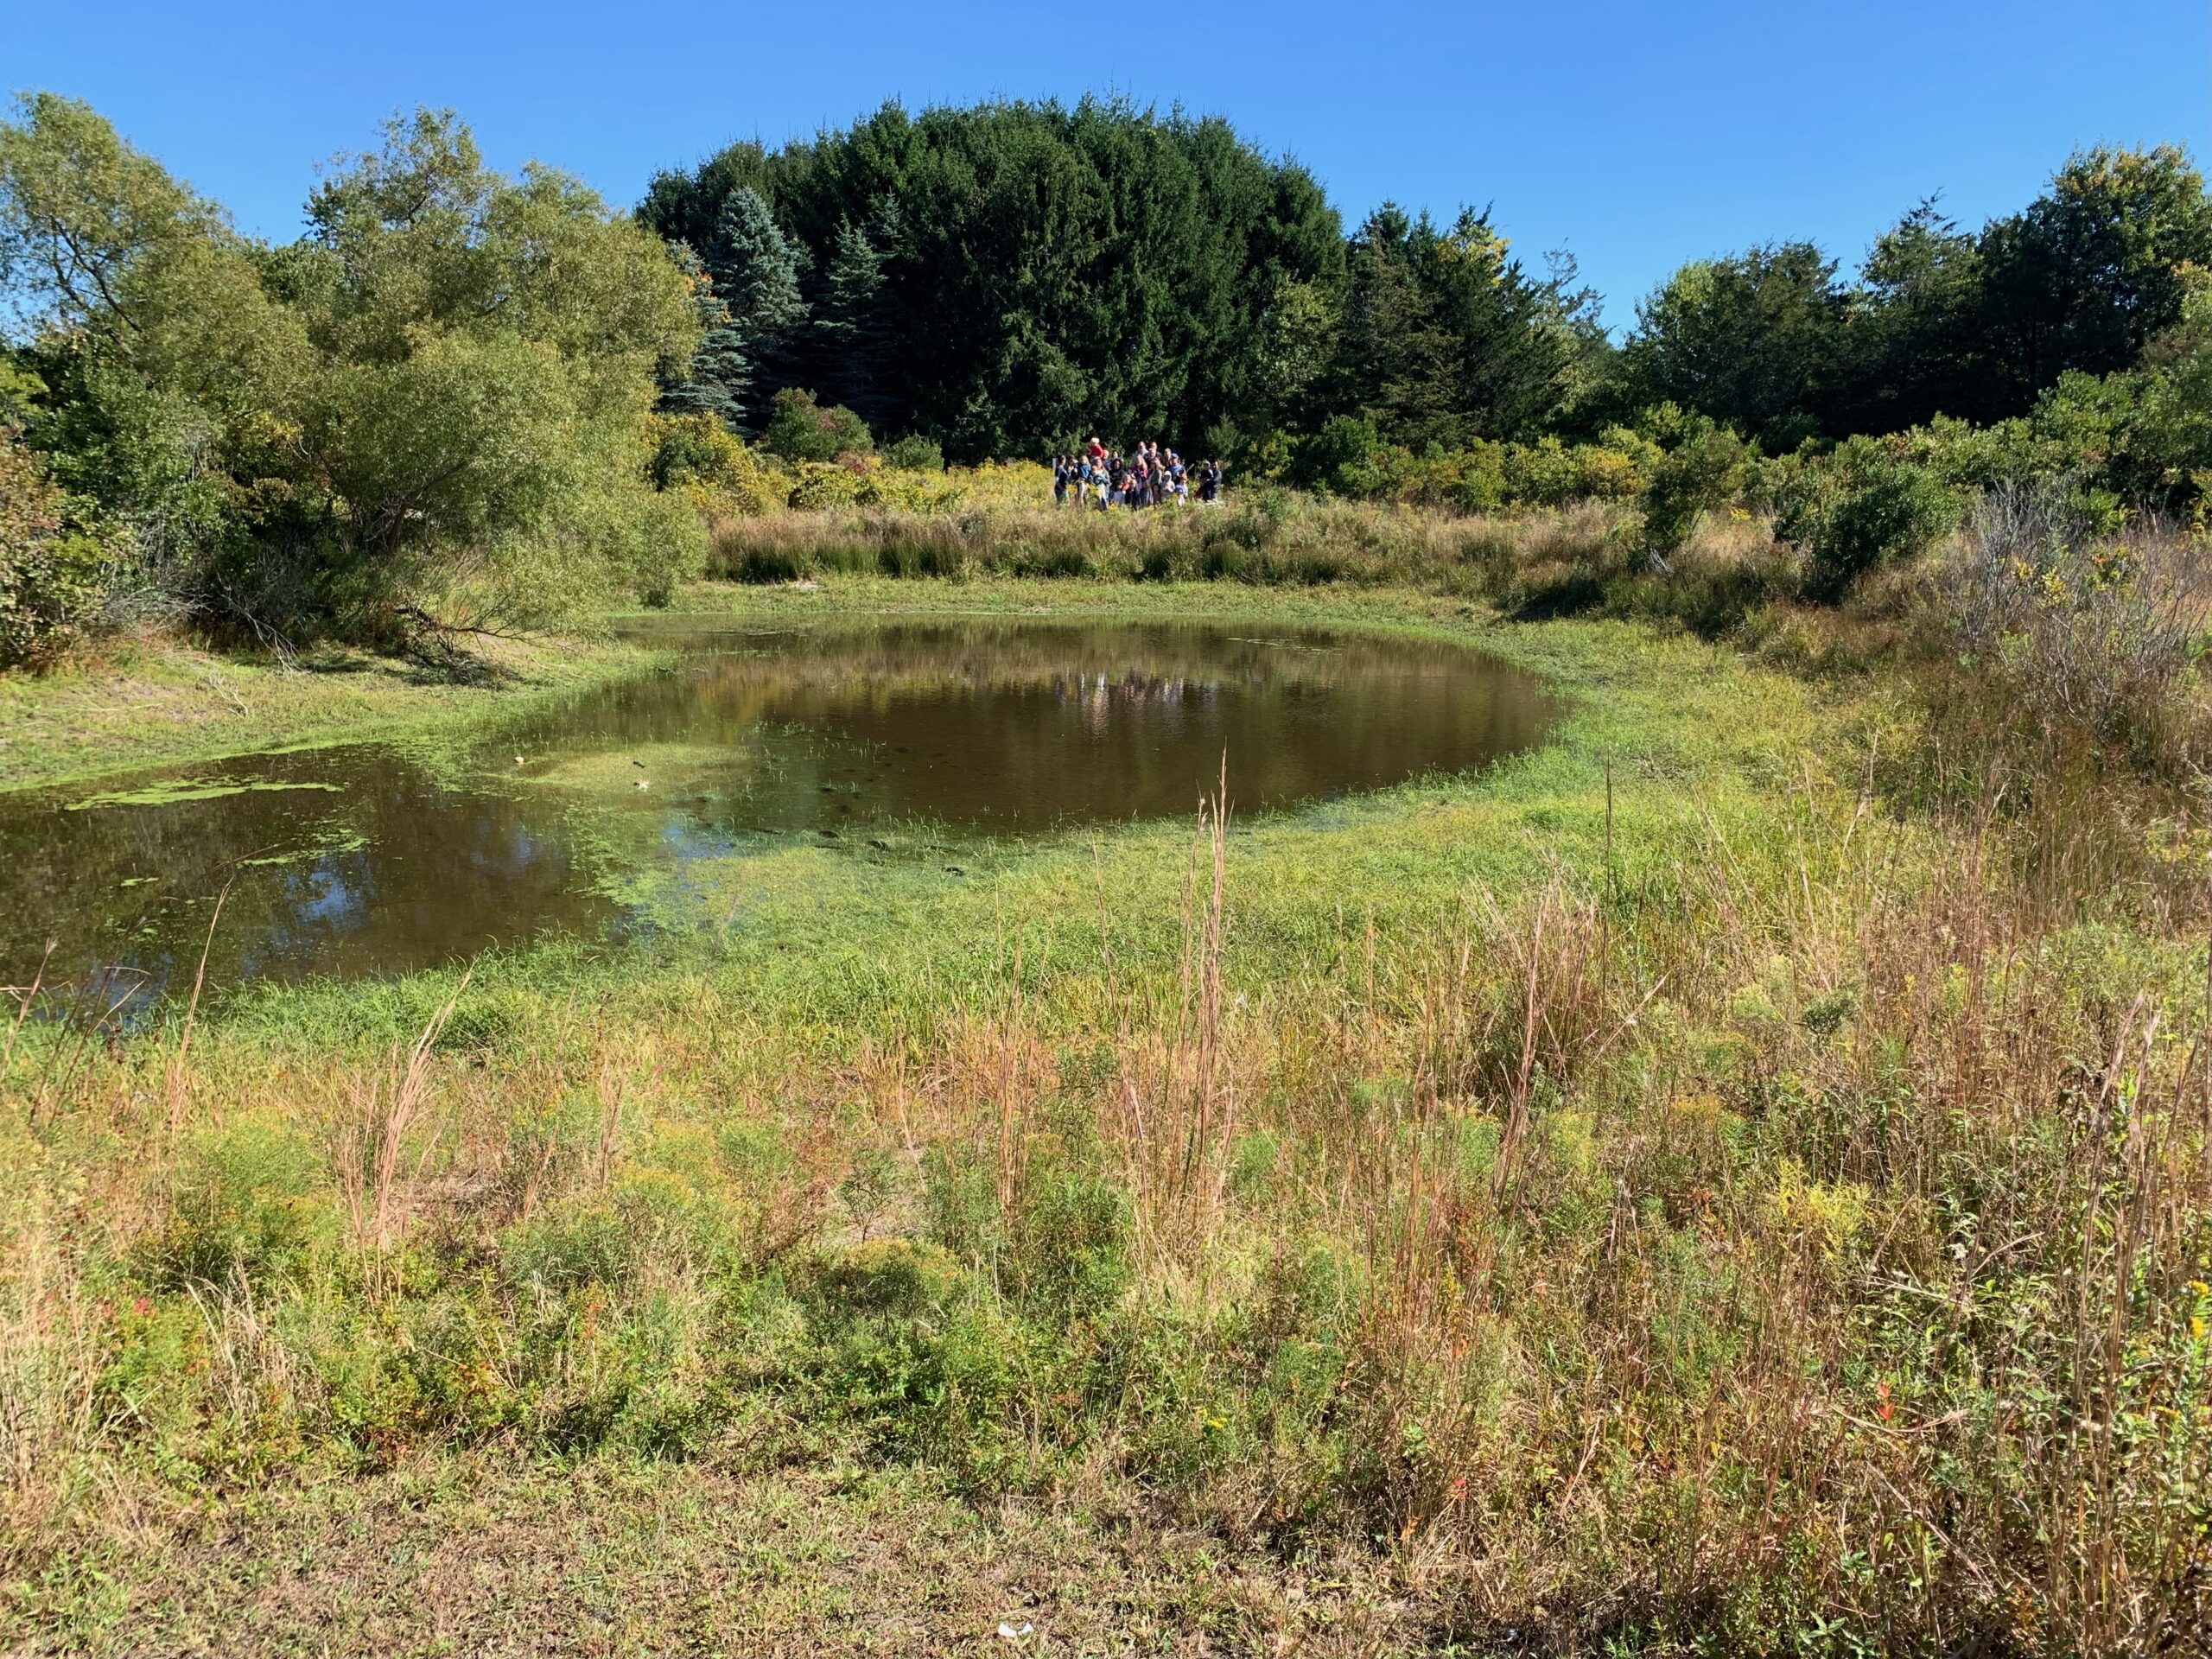 The vineyard field pond at the South Fork Natural History Museum, with a group of attendees at Saturday's anniversary celebration for the Friends of the Long Pond Greenbelt. COURTESY FRIENDS OF THE LONG POND GREENBELT